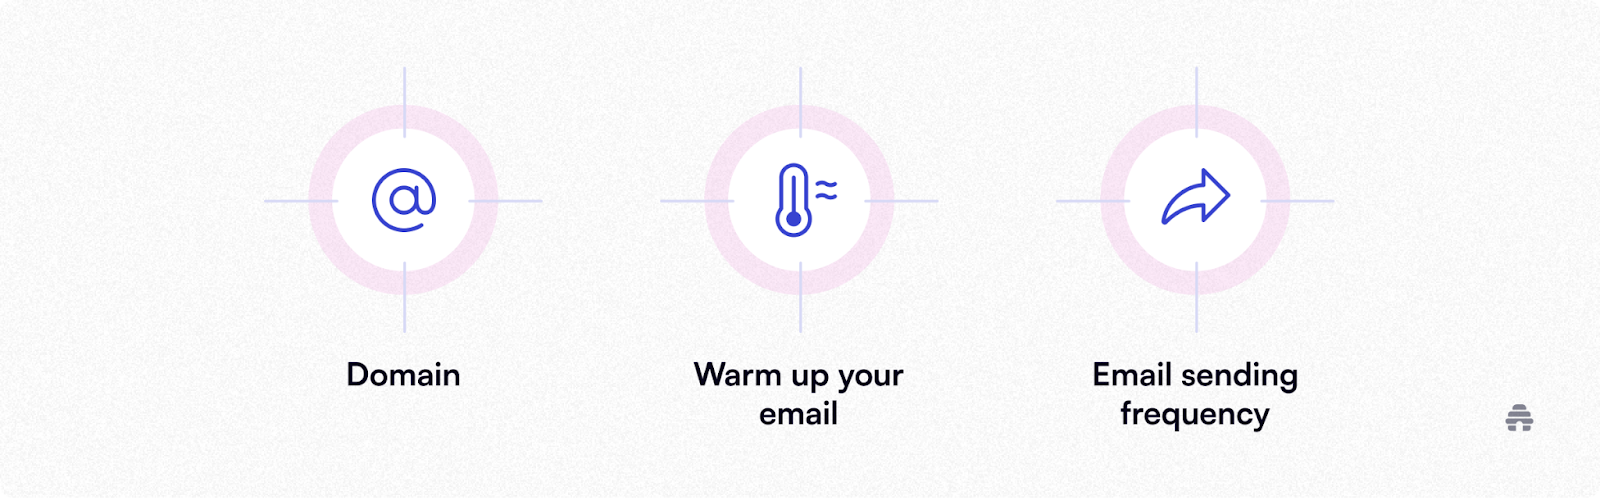 How Your Email Design Can Boost Deliverability Rates